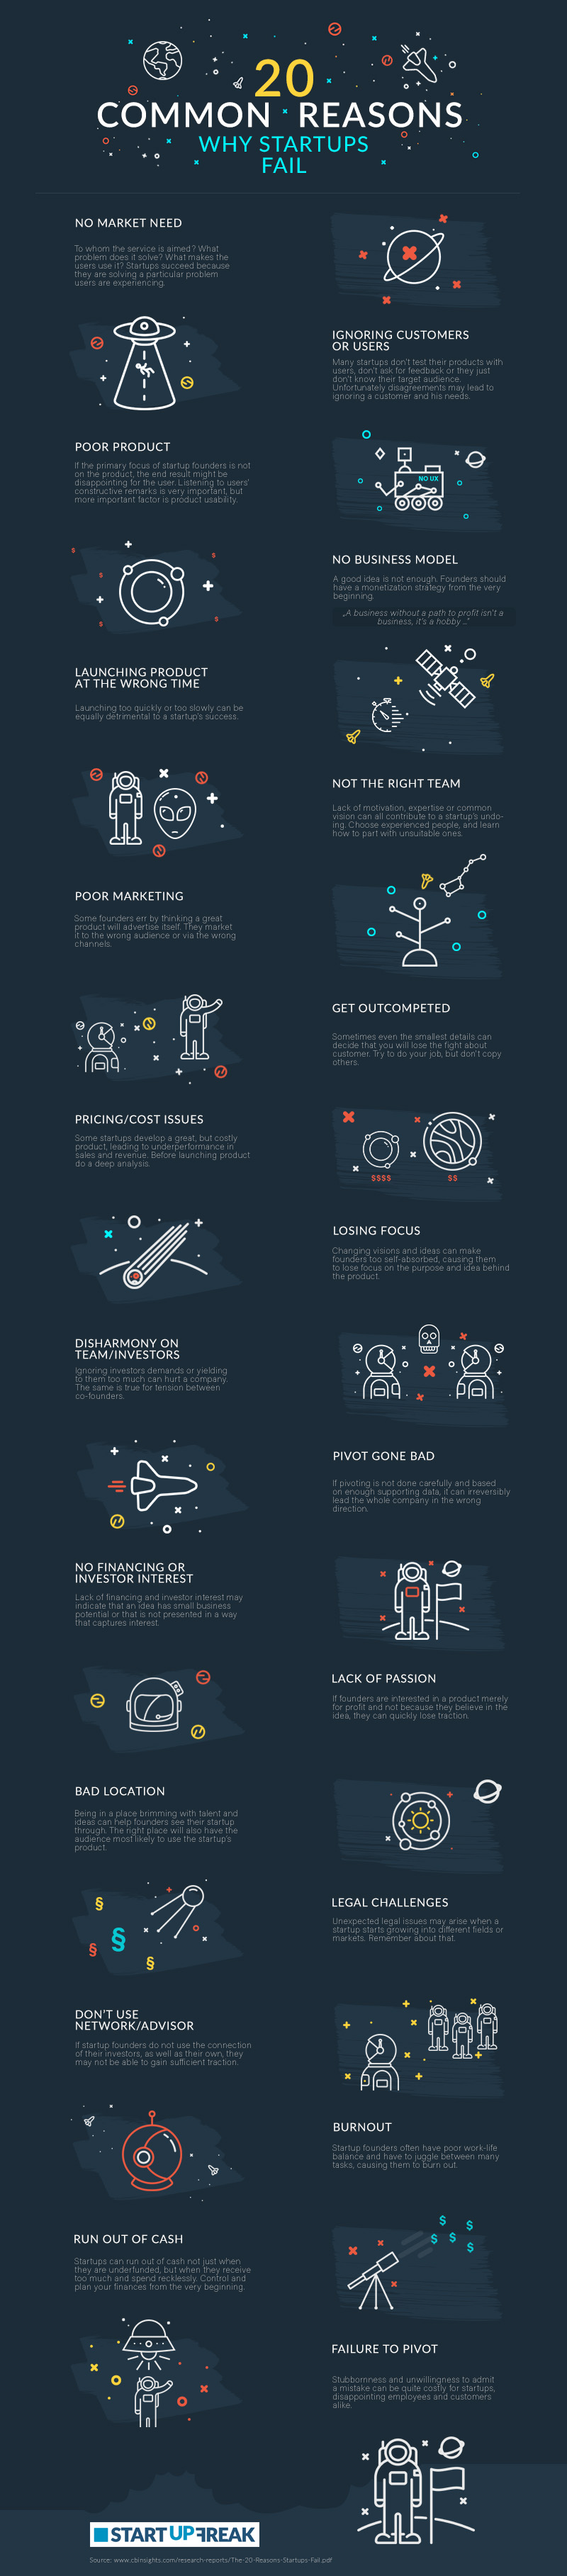 Common Reasons Startups Fail Infographic